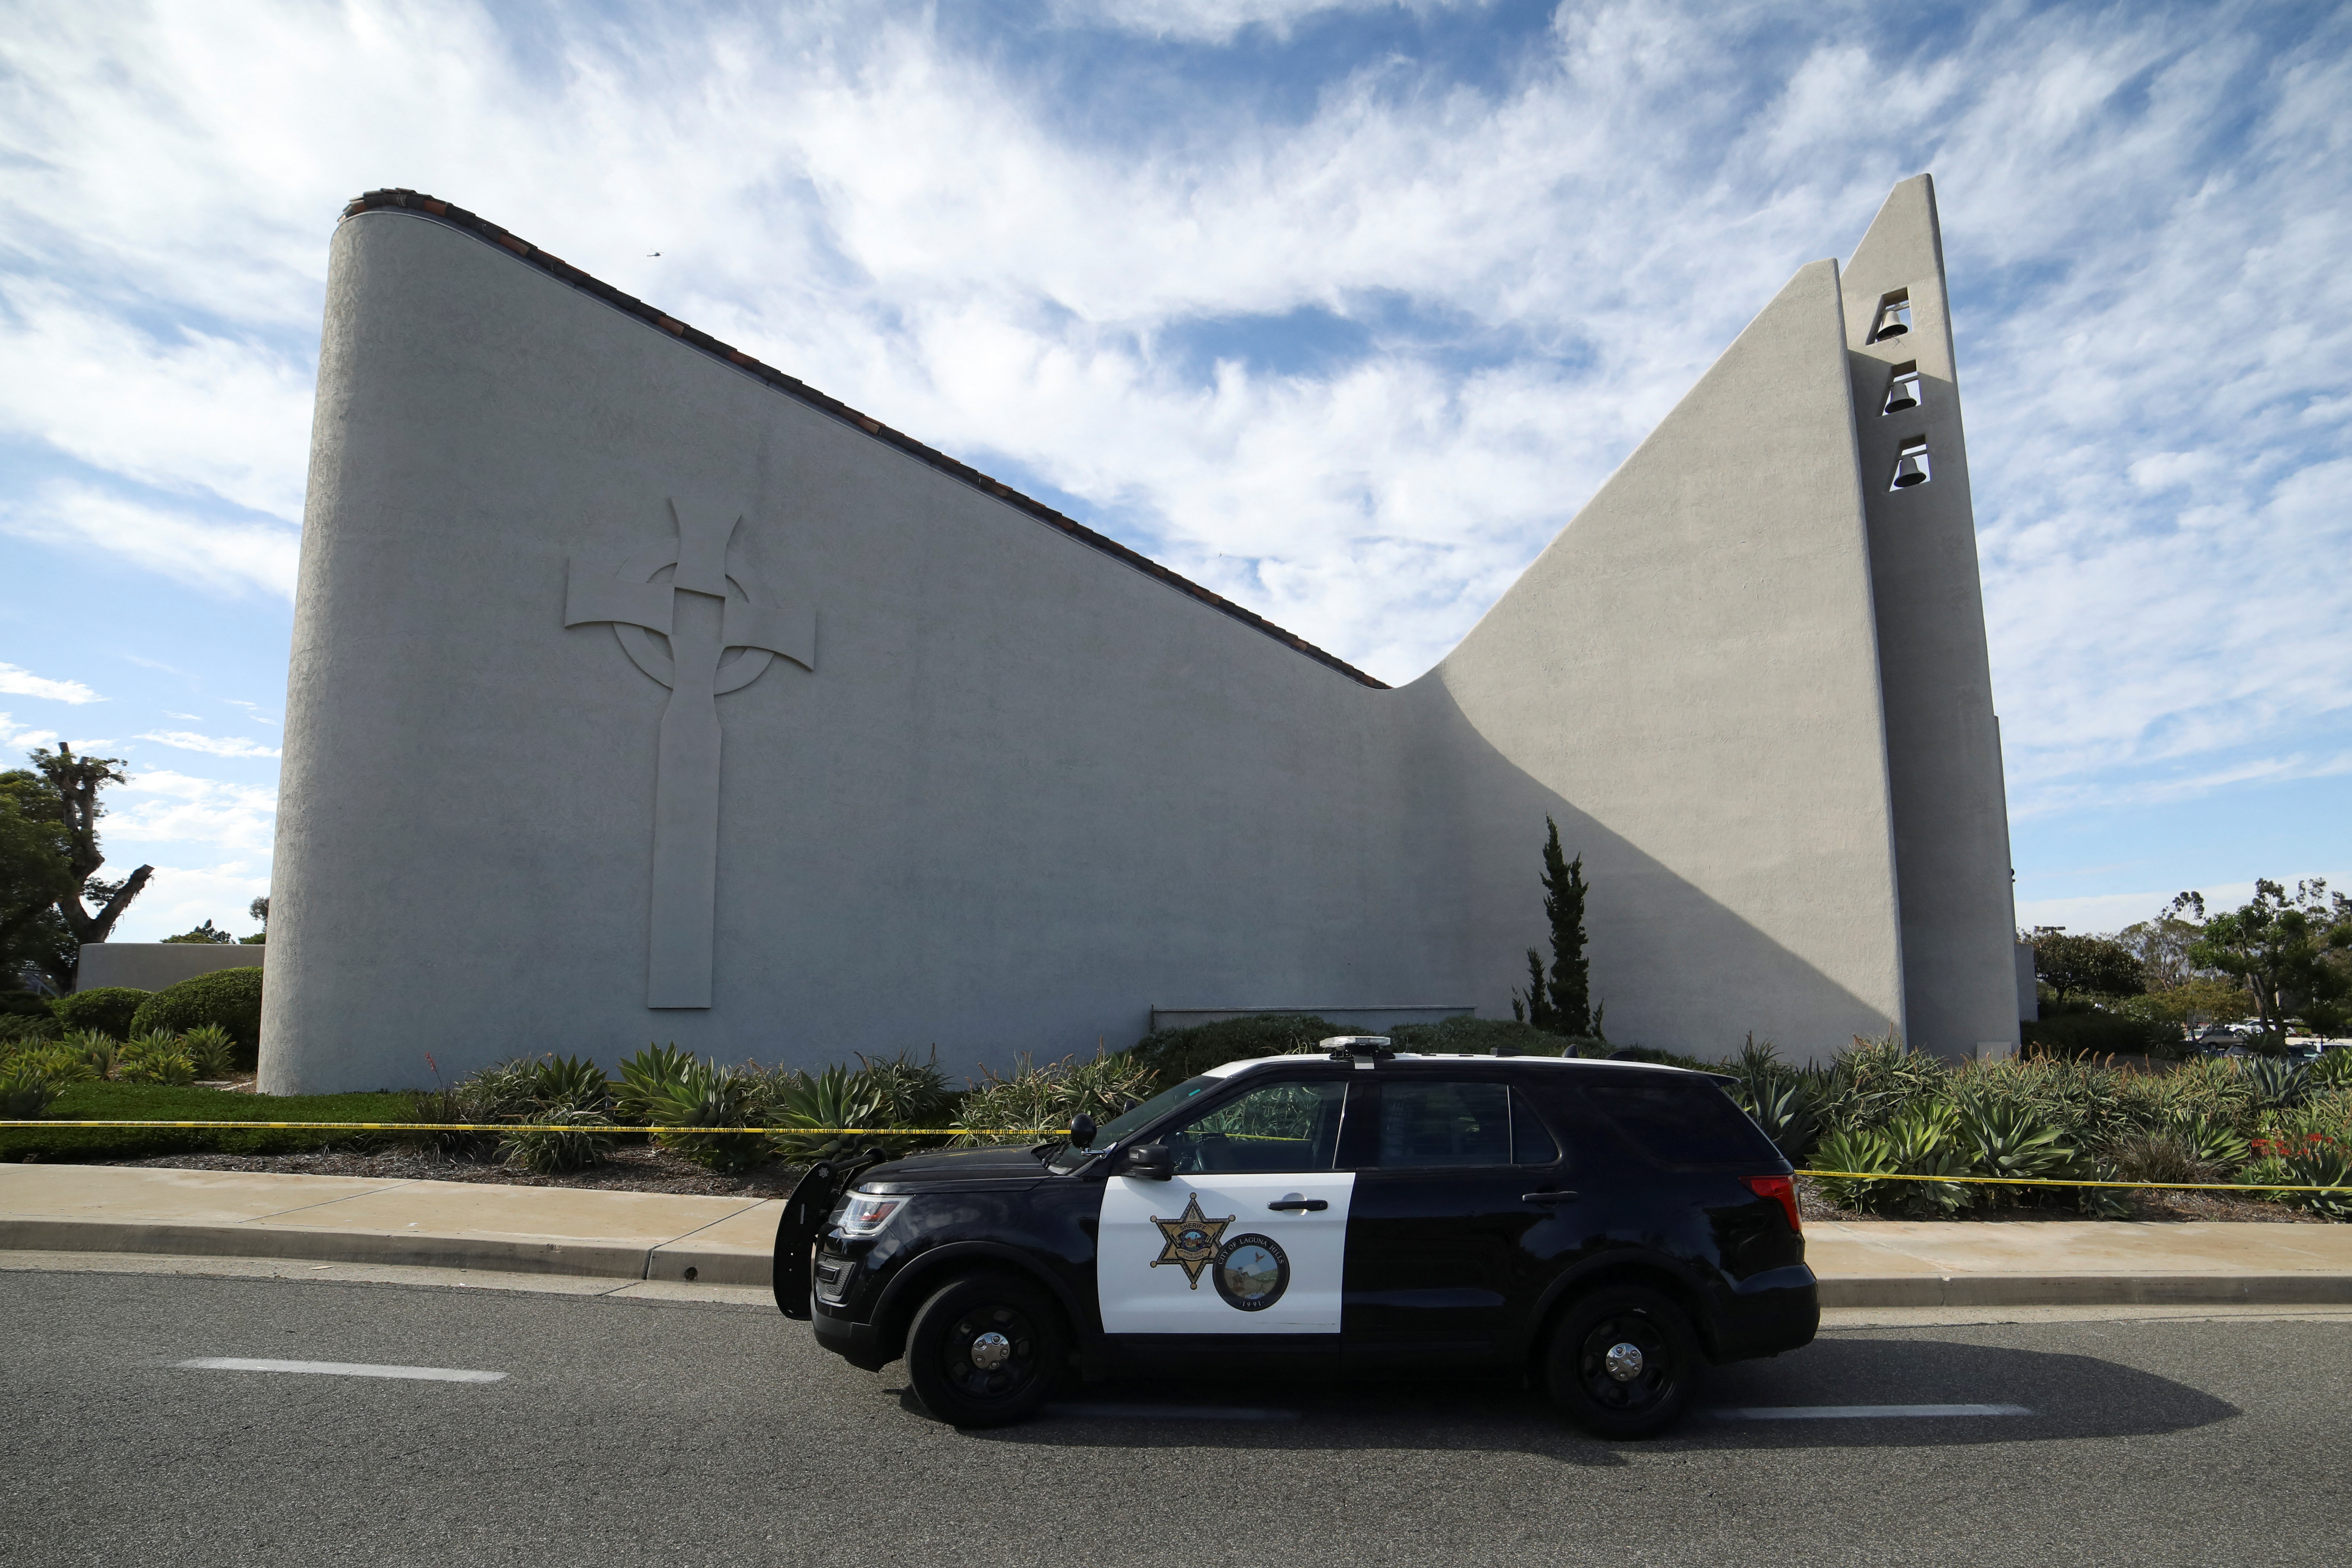 The Geneva Presbyterian Church is seen after a deadly shooting, in Laguna Woods